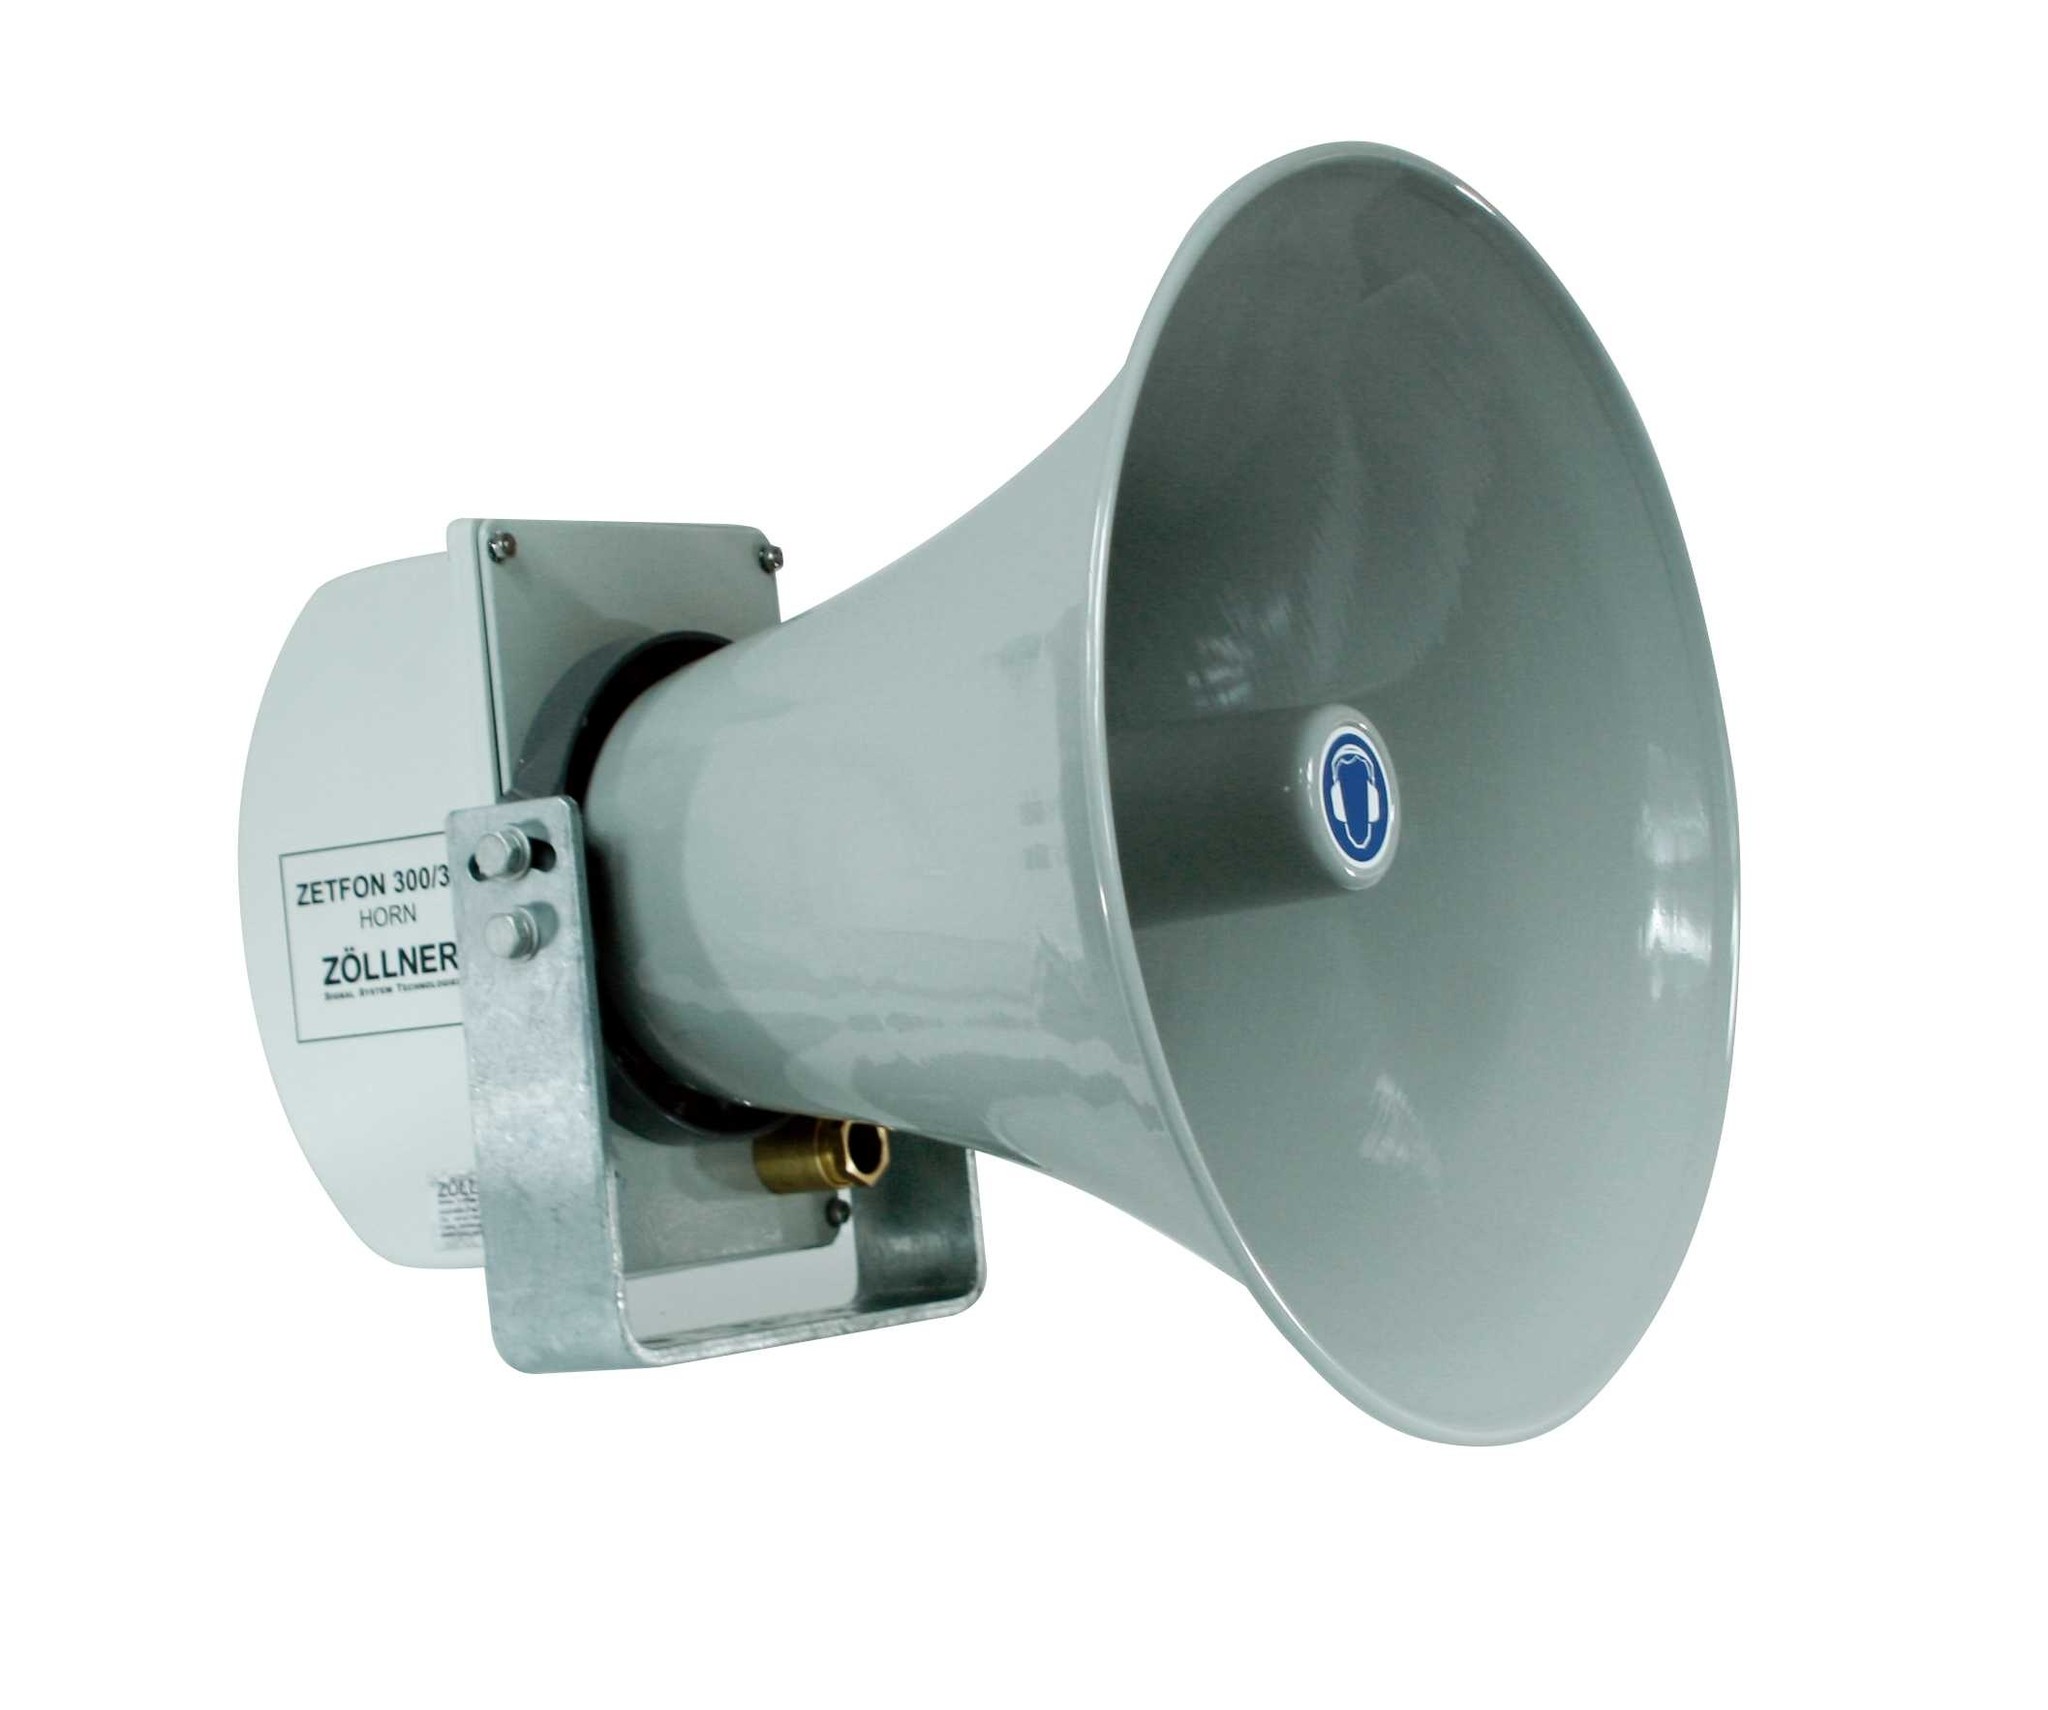 ZÖLLNER ZETFON 300/310 – Electronic Shiphorn with microphone unit -  1st-Relief